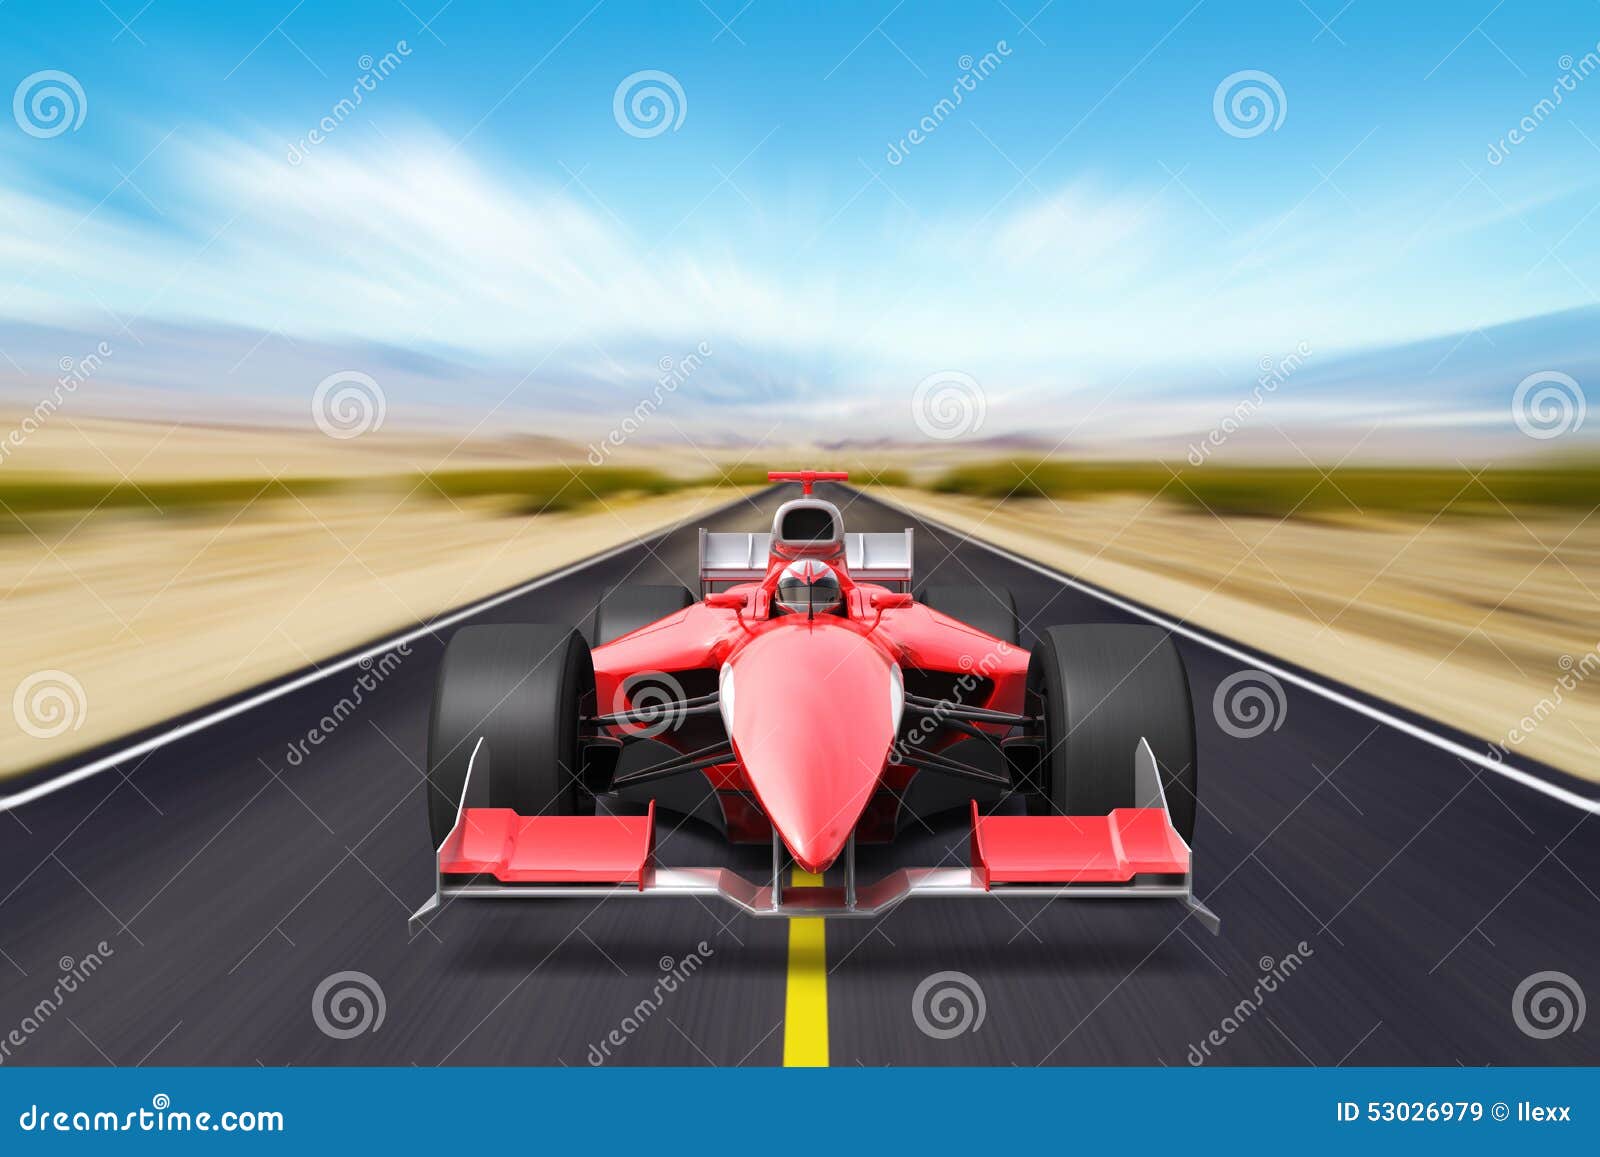 Brandless Racing Cars Race Track Illustration Stock Photo by